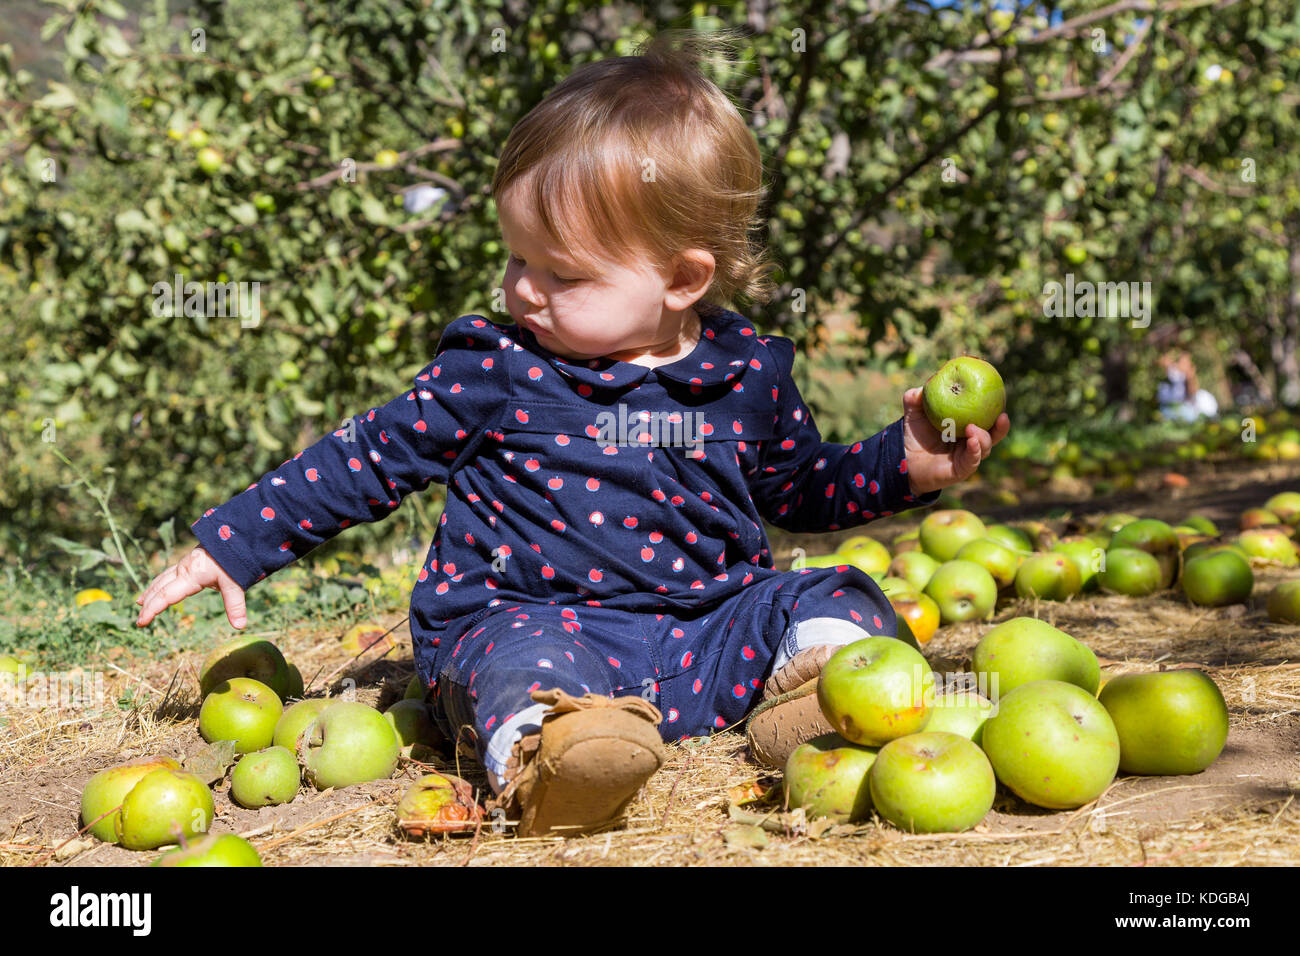 Baby Sitting with Apples Stock Photo